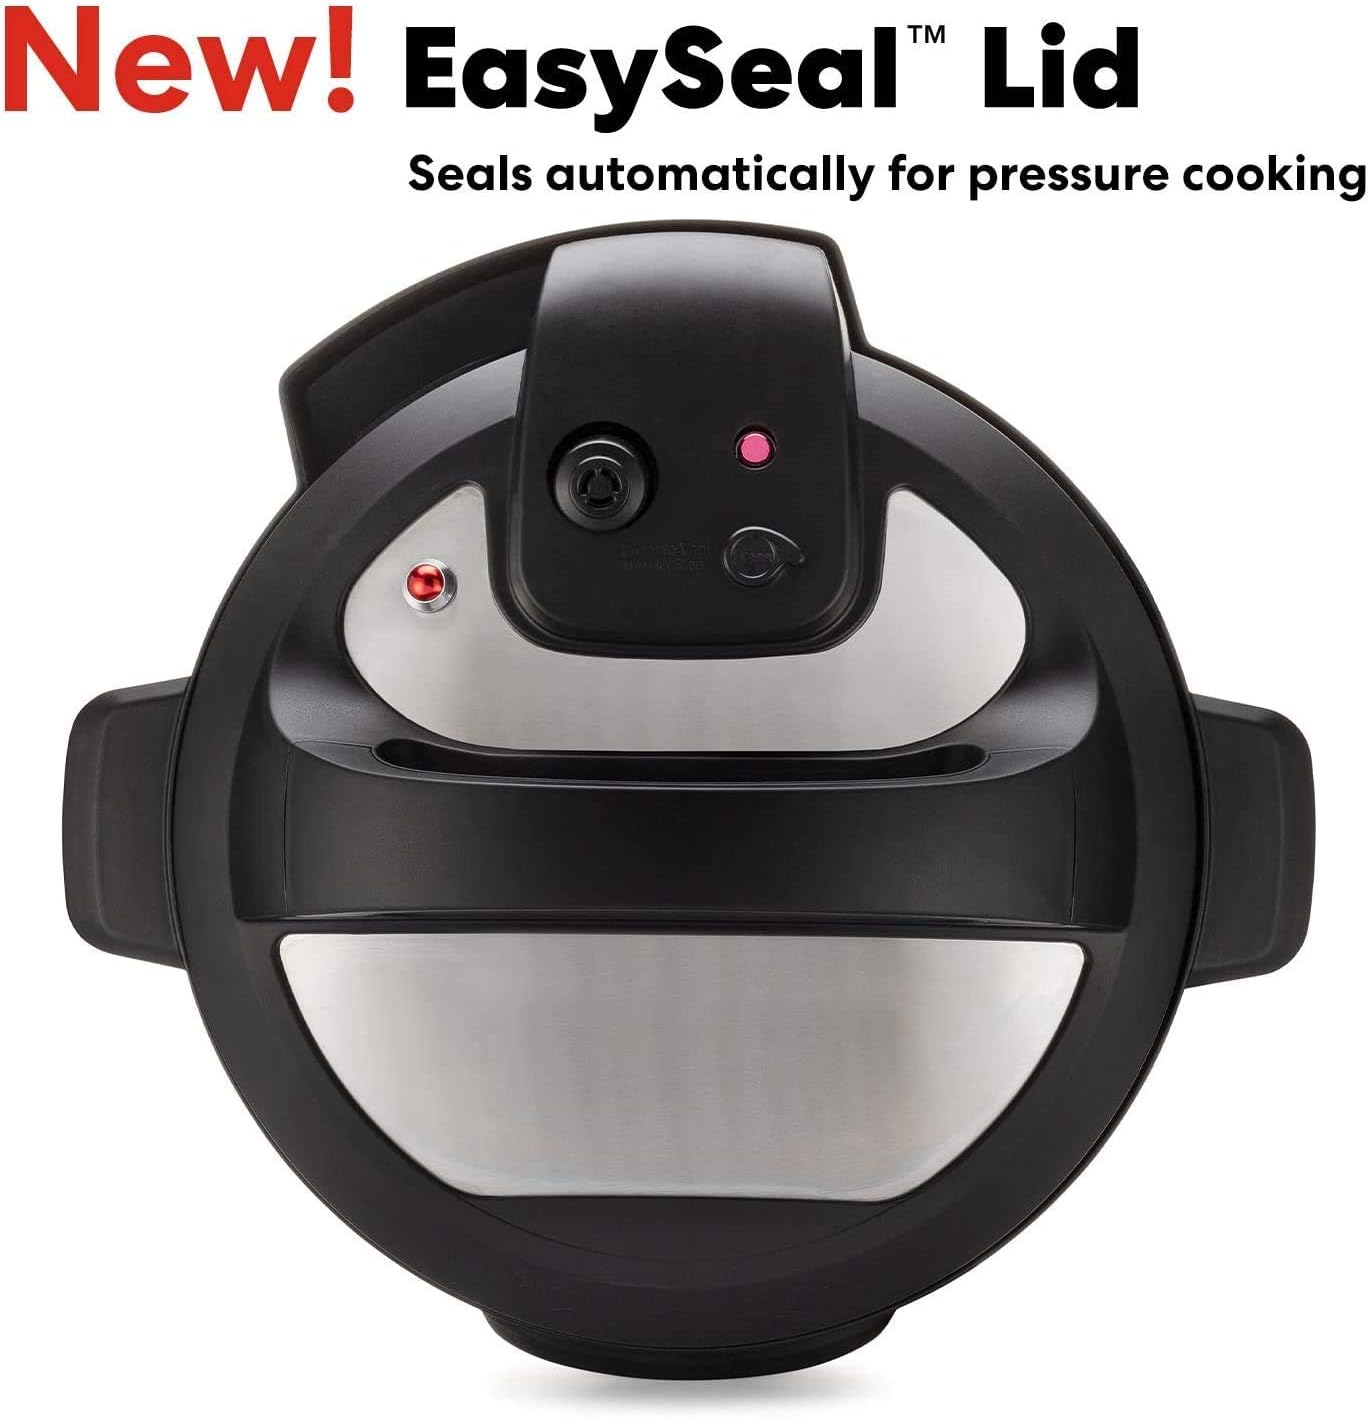 8qt Instant Pot Duo Crisp 11-in-1 Air Fryer and Electric Pressure Cooker  Combo